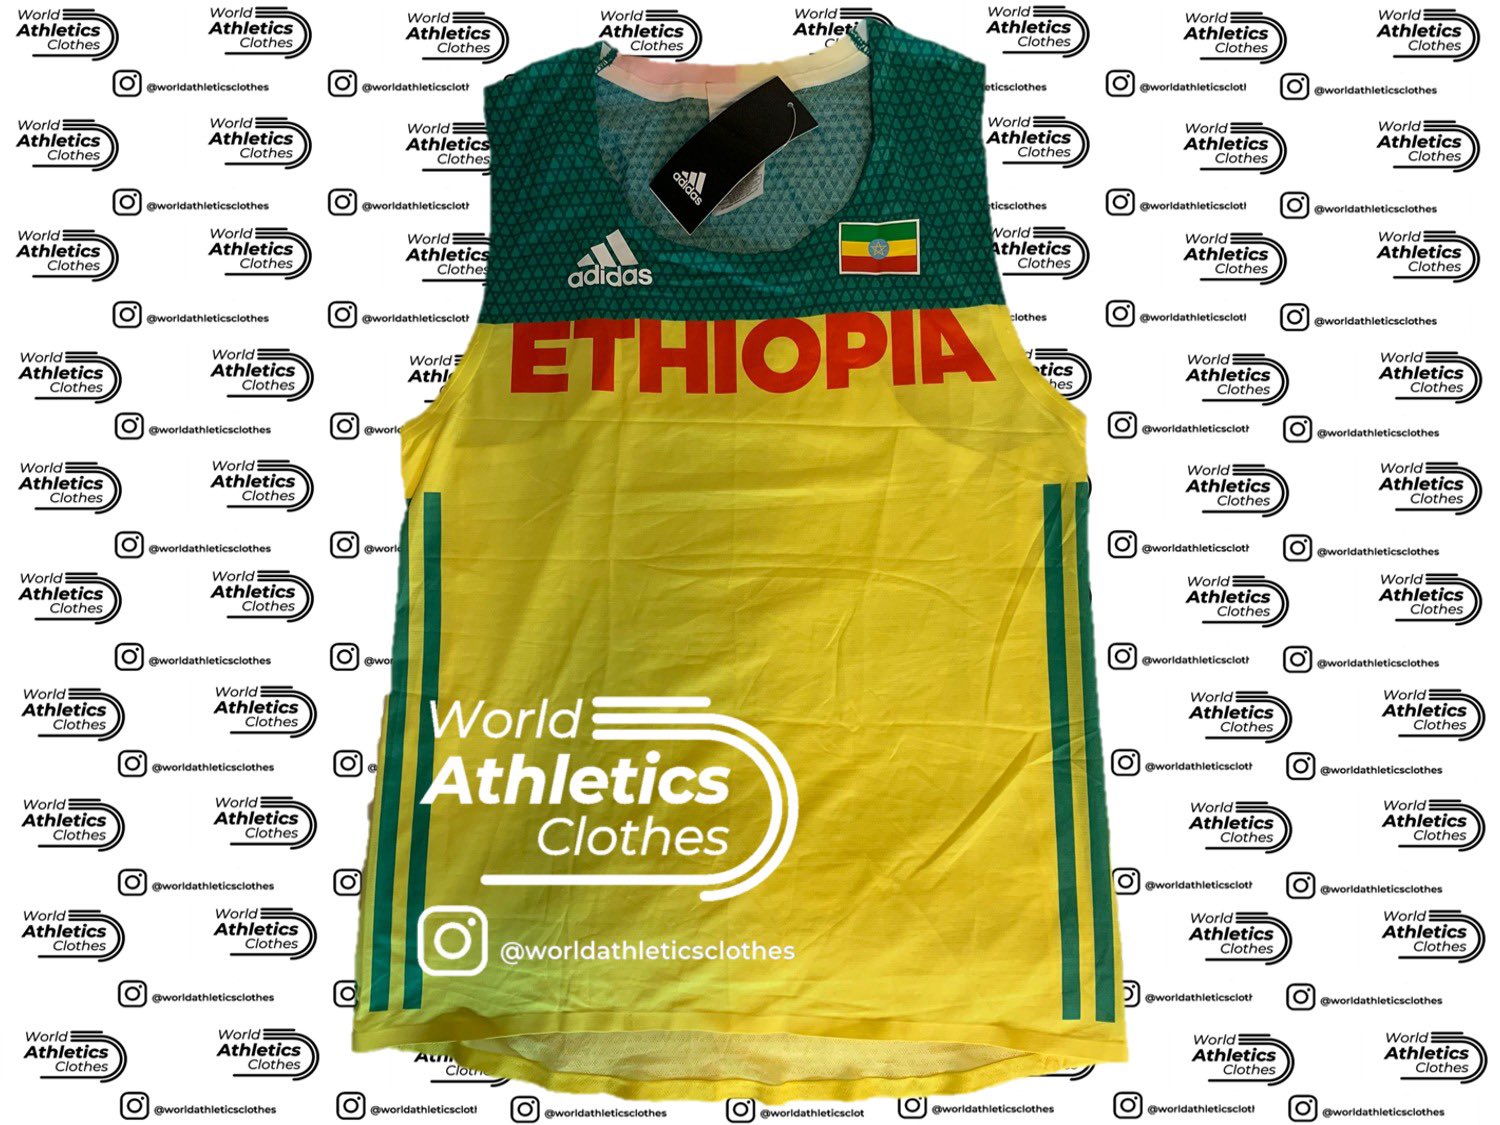 escritorio General Gruñón World Athletics Clothes on Twitter: "💥𝘼𝙑𝘼𝙄𝙇𝘼𝘽𝙇𝙀💥 🇪🇹 Ethiopia  Adidas Pro Elite singlet 🚺 ➡️ Size: S‼️ ✈𝑺𝒉𝒊𝒑𝒑𝒊𝒏𝒈  𝒆𝒗𝒆𝒓𝒚𝒘𝒉𝒆𝒓𝒆🌍 👉𝘚𝘦𝘯𝘥 𝘢 DM with your offer 📥 #nikerunning  #running #trackandfieldclothes #usatf #nike ...